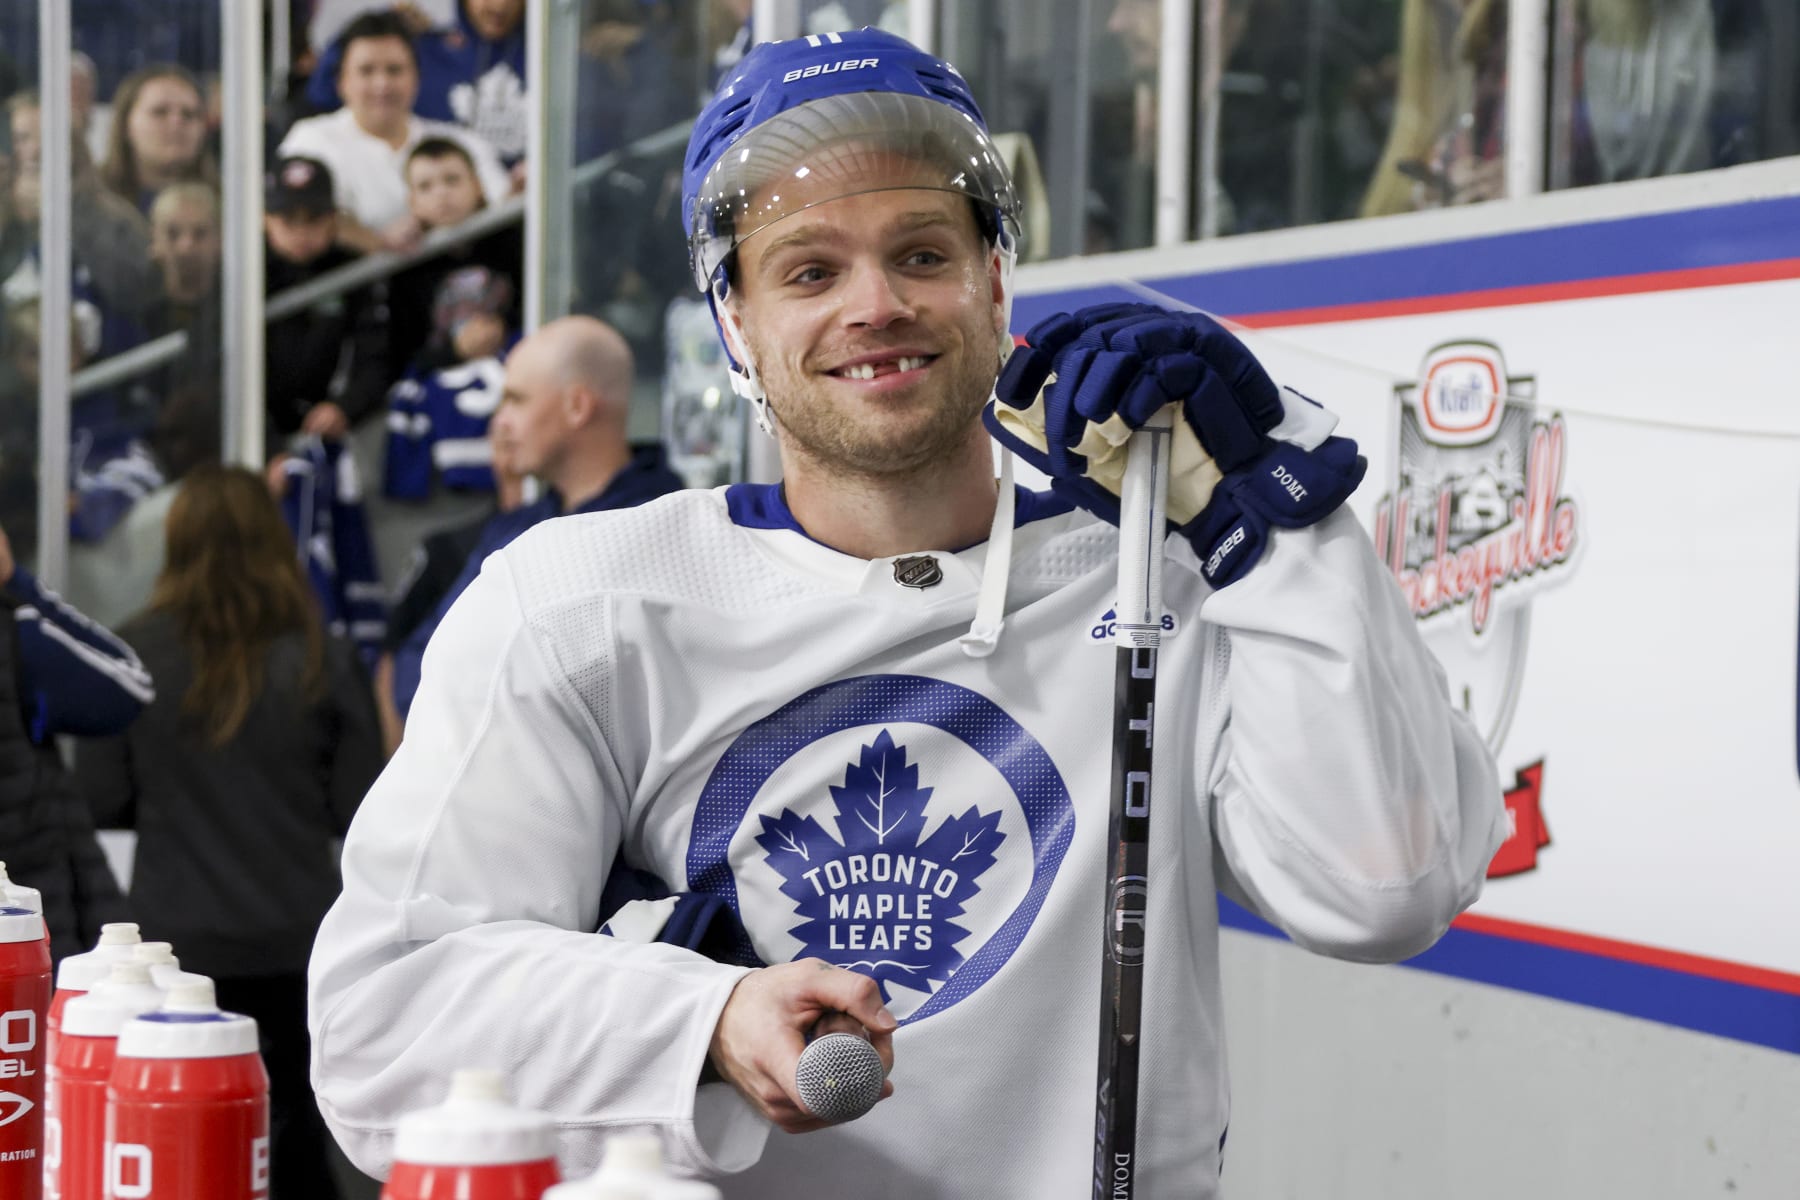 Why don't the Maple Leafs retire numbers if they're not handing